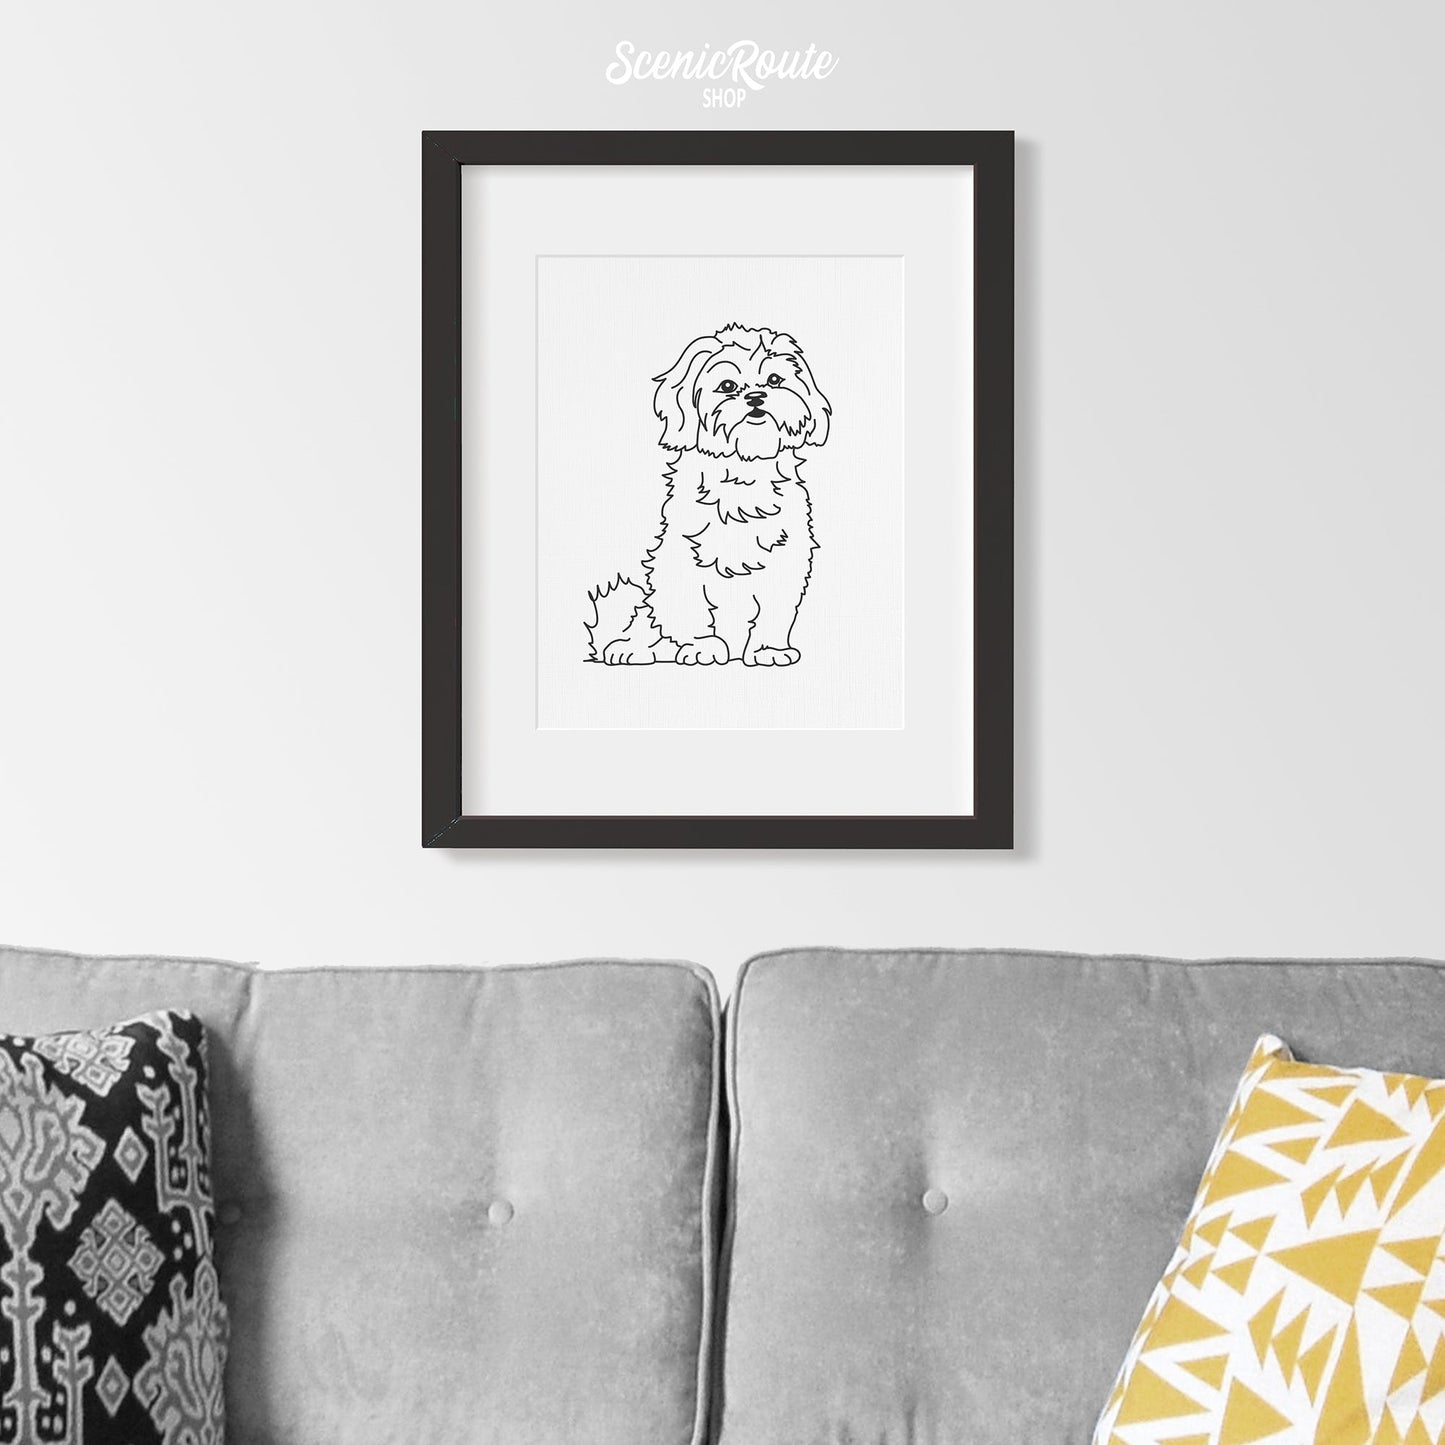 A framed line art drawing of a Shih Tzu dog hung above a couch